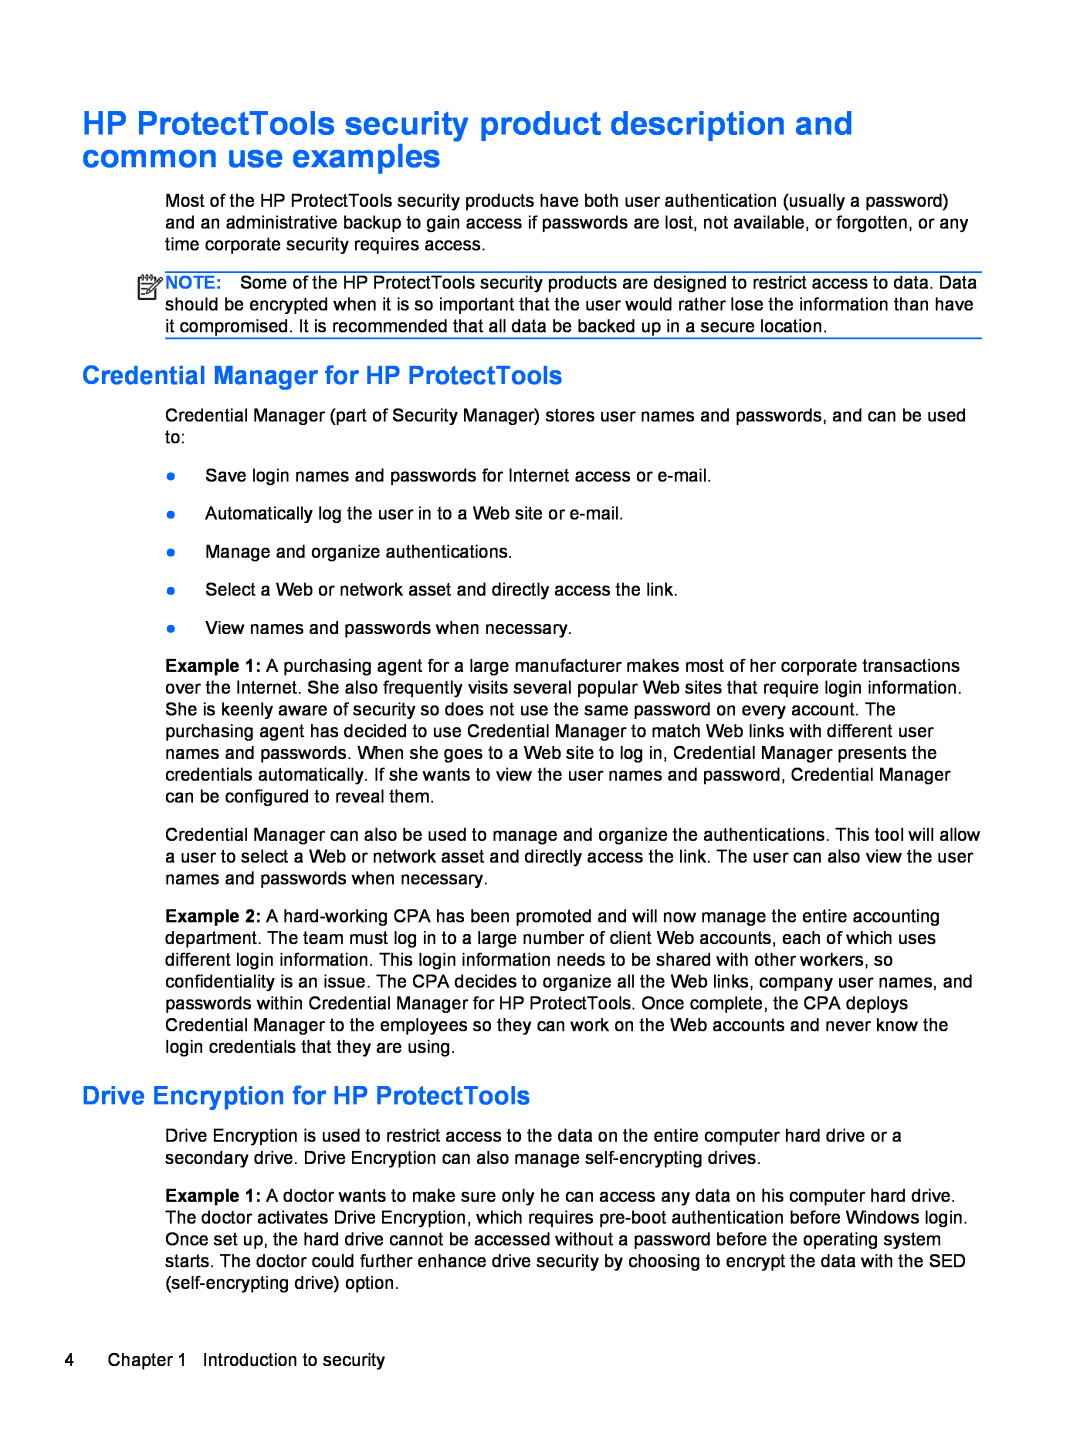 HP 2 Base Model HP ProtectTools security product description and common use examples, Drive Encryption for HP ProtectTools 